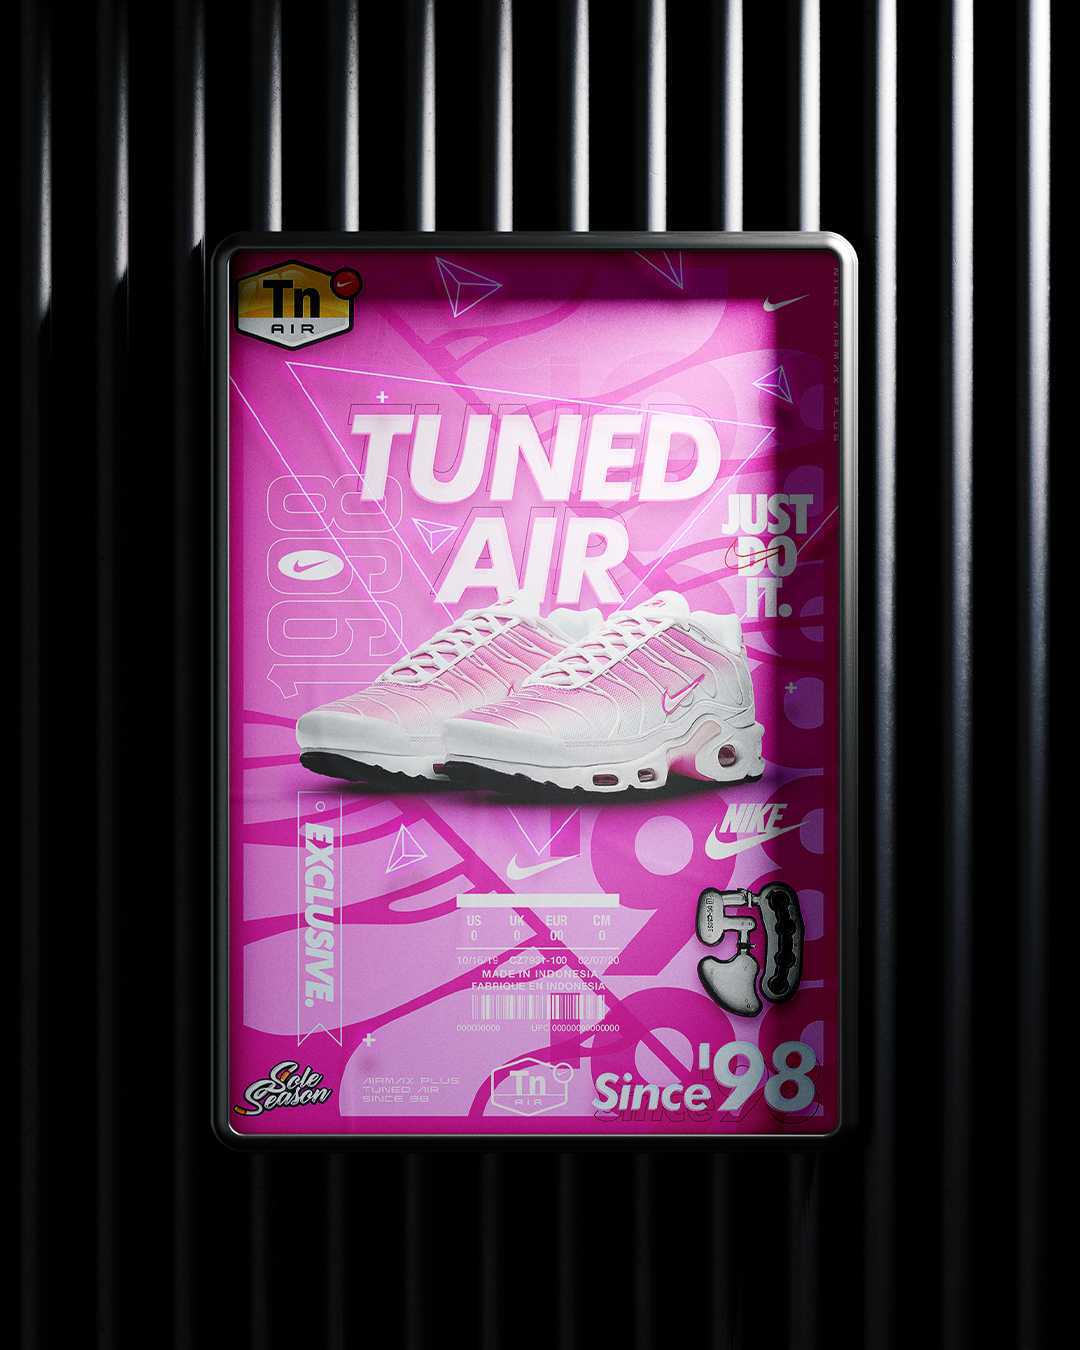 Nike Tn - Pink Fade 'Tuned Depuis '98'-Poster A3